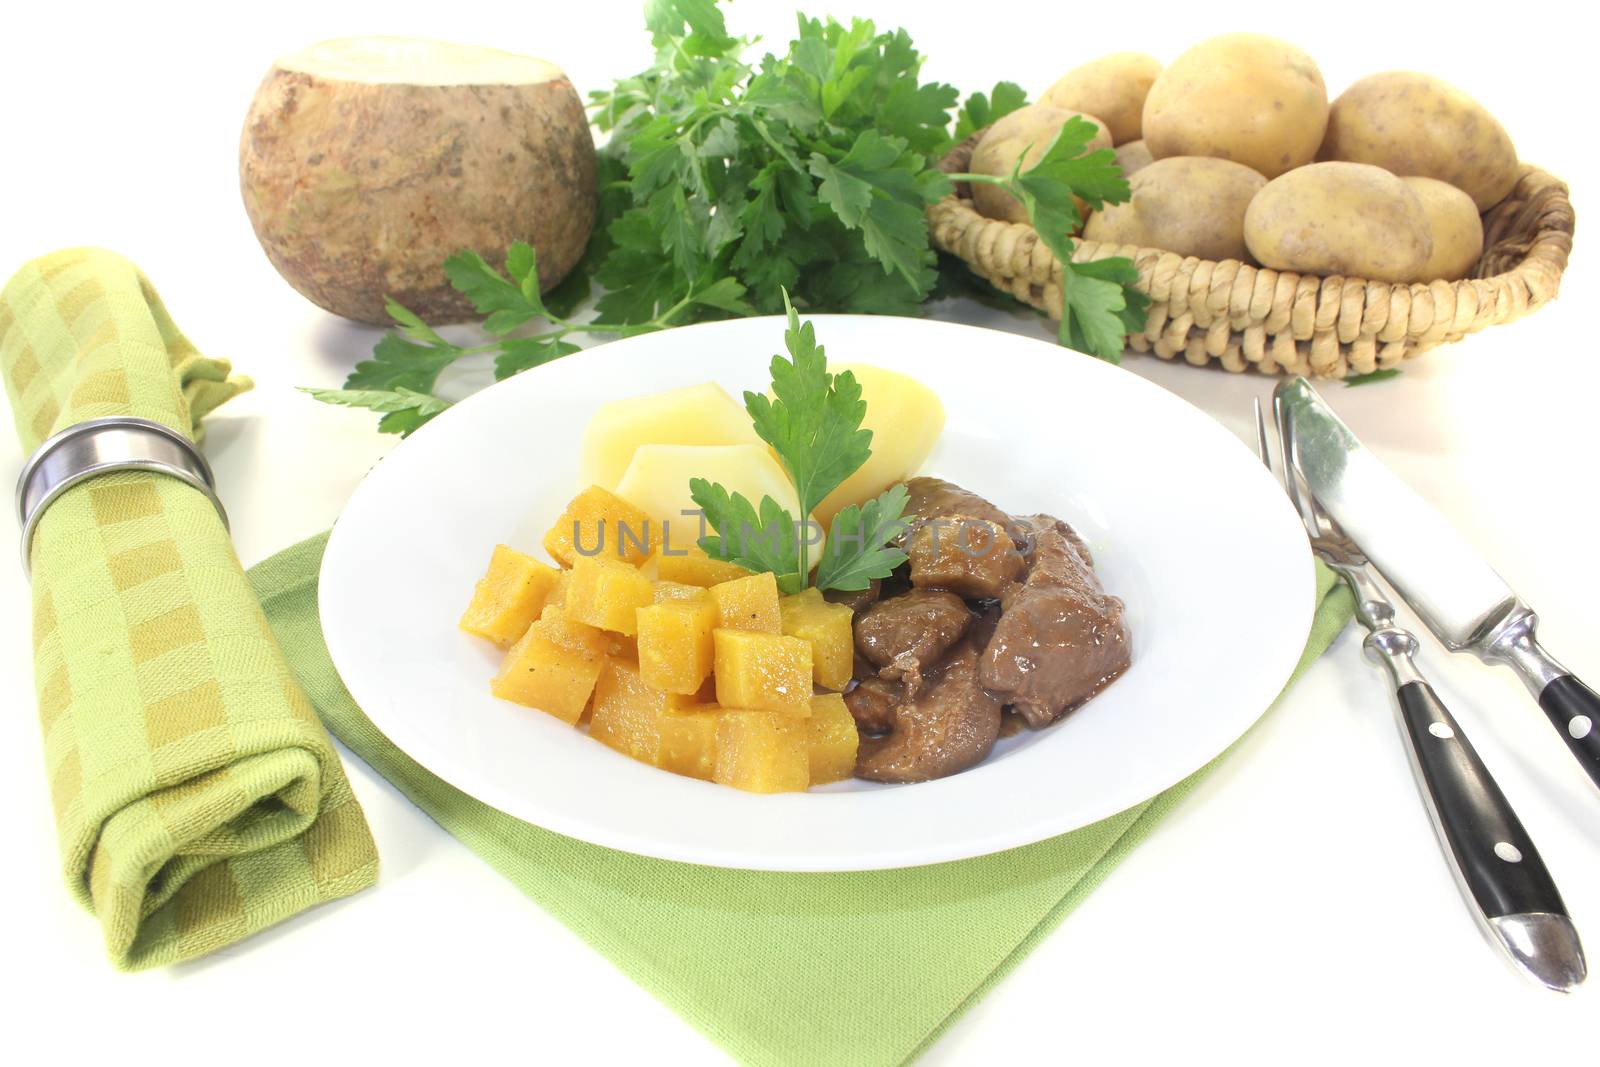 Venison goulash with potatoes by discovery